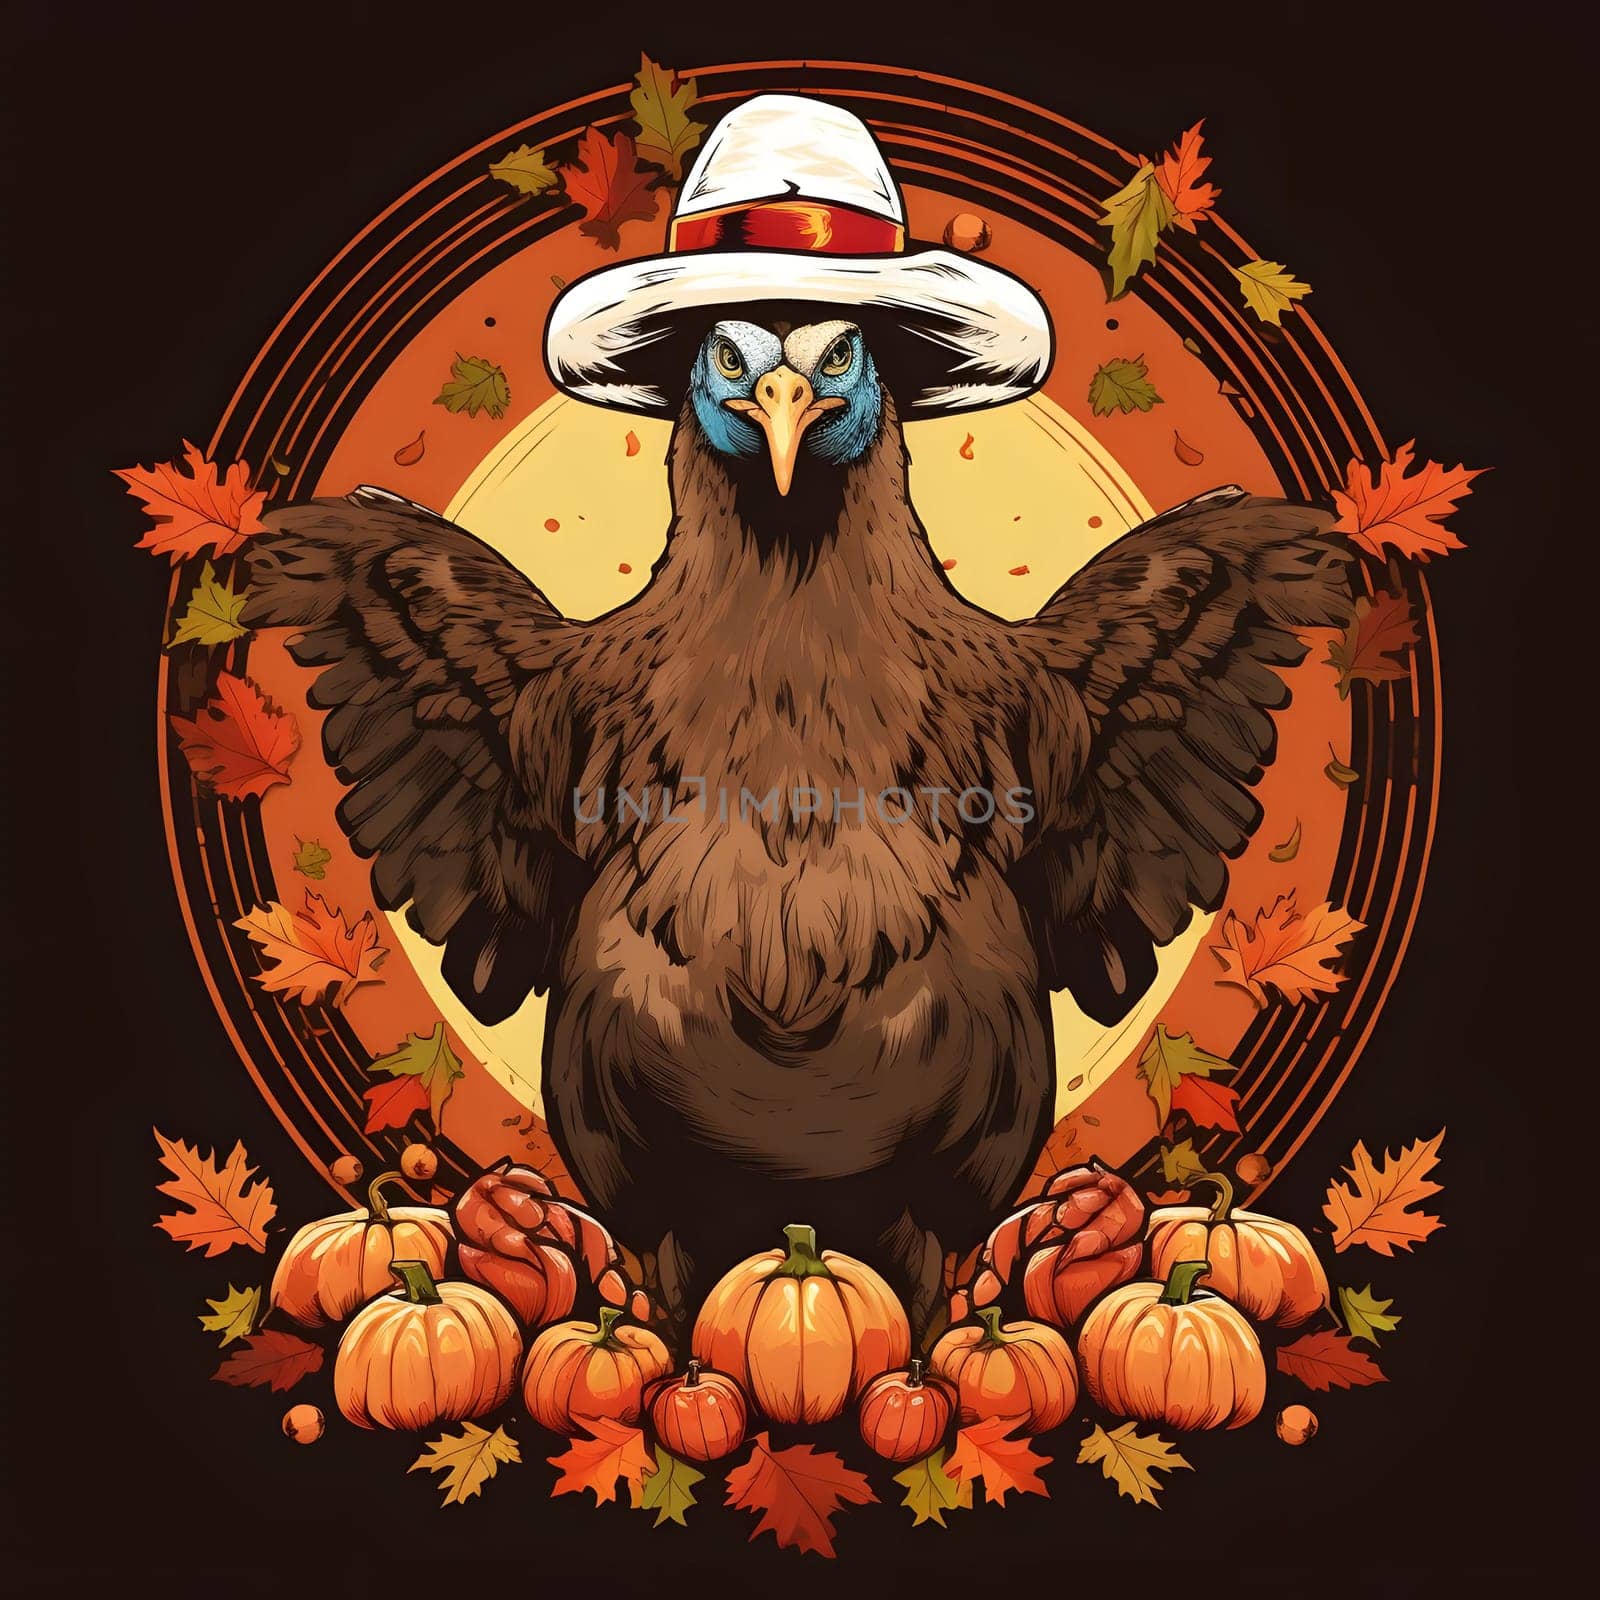 Logo, graphic, illustration of a turkey with raised wings wearing a cowboy hat in a circle, around pumpkin leaves. Turkey as the main dish of thanksgiving for the harvest. by ThemesS